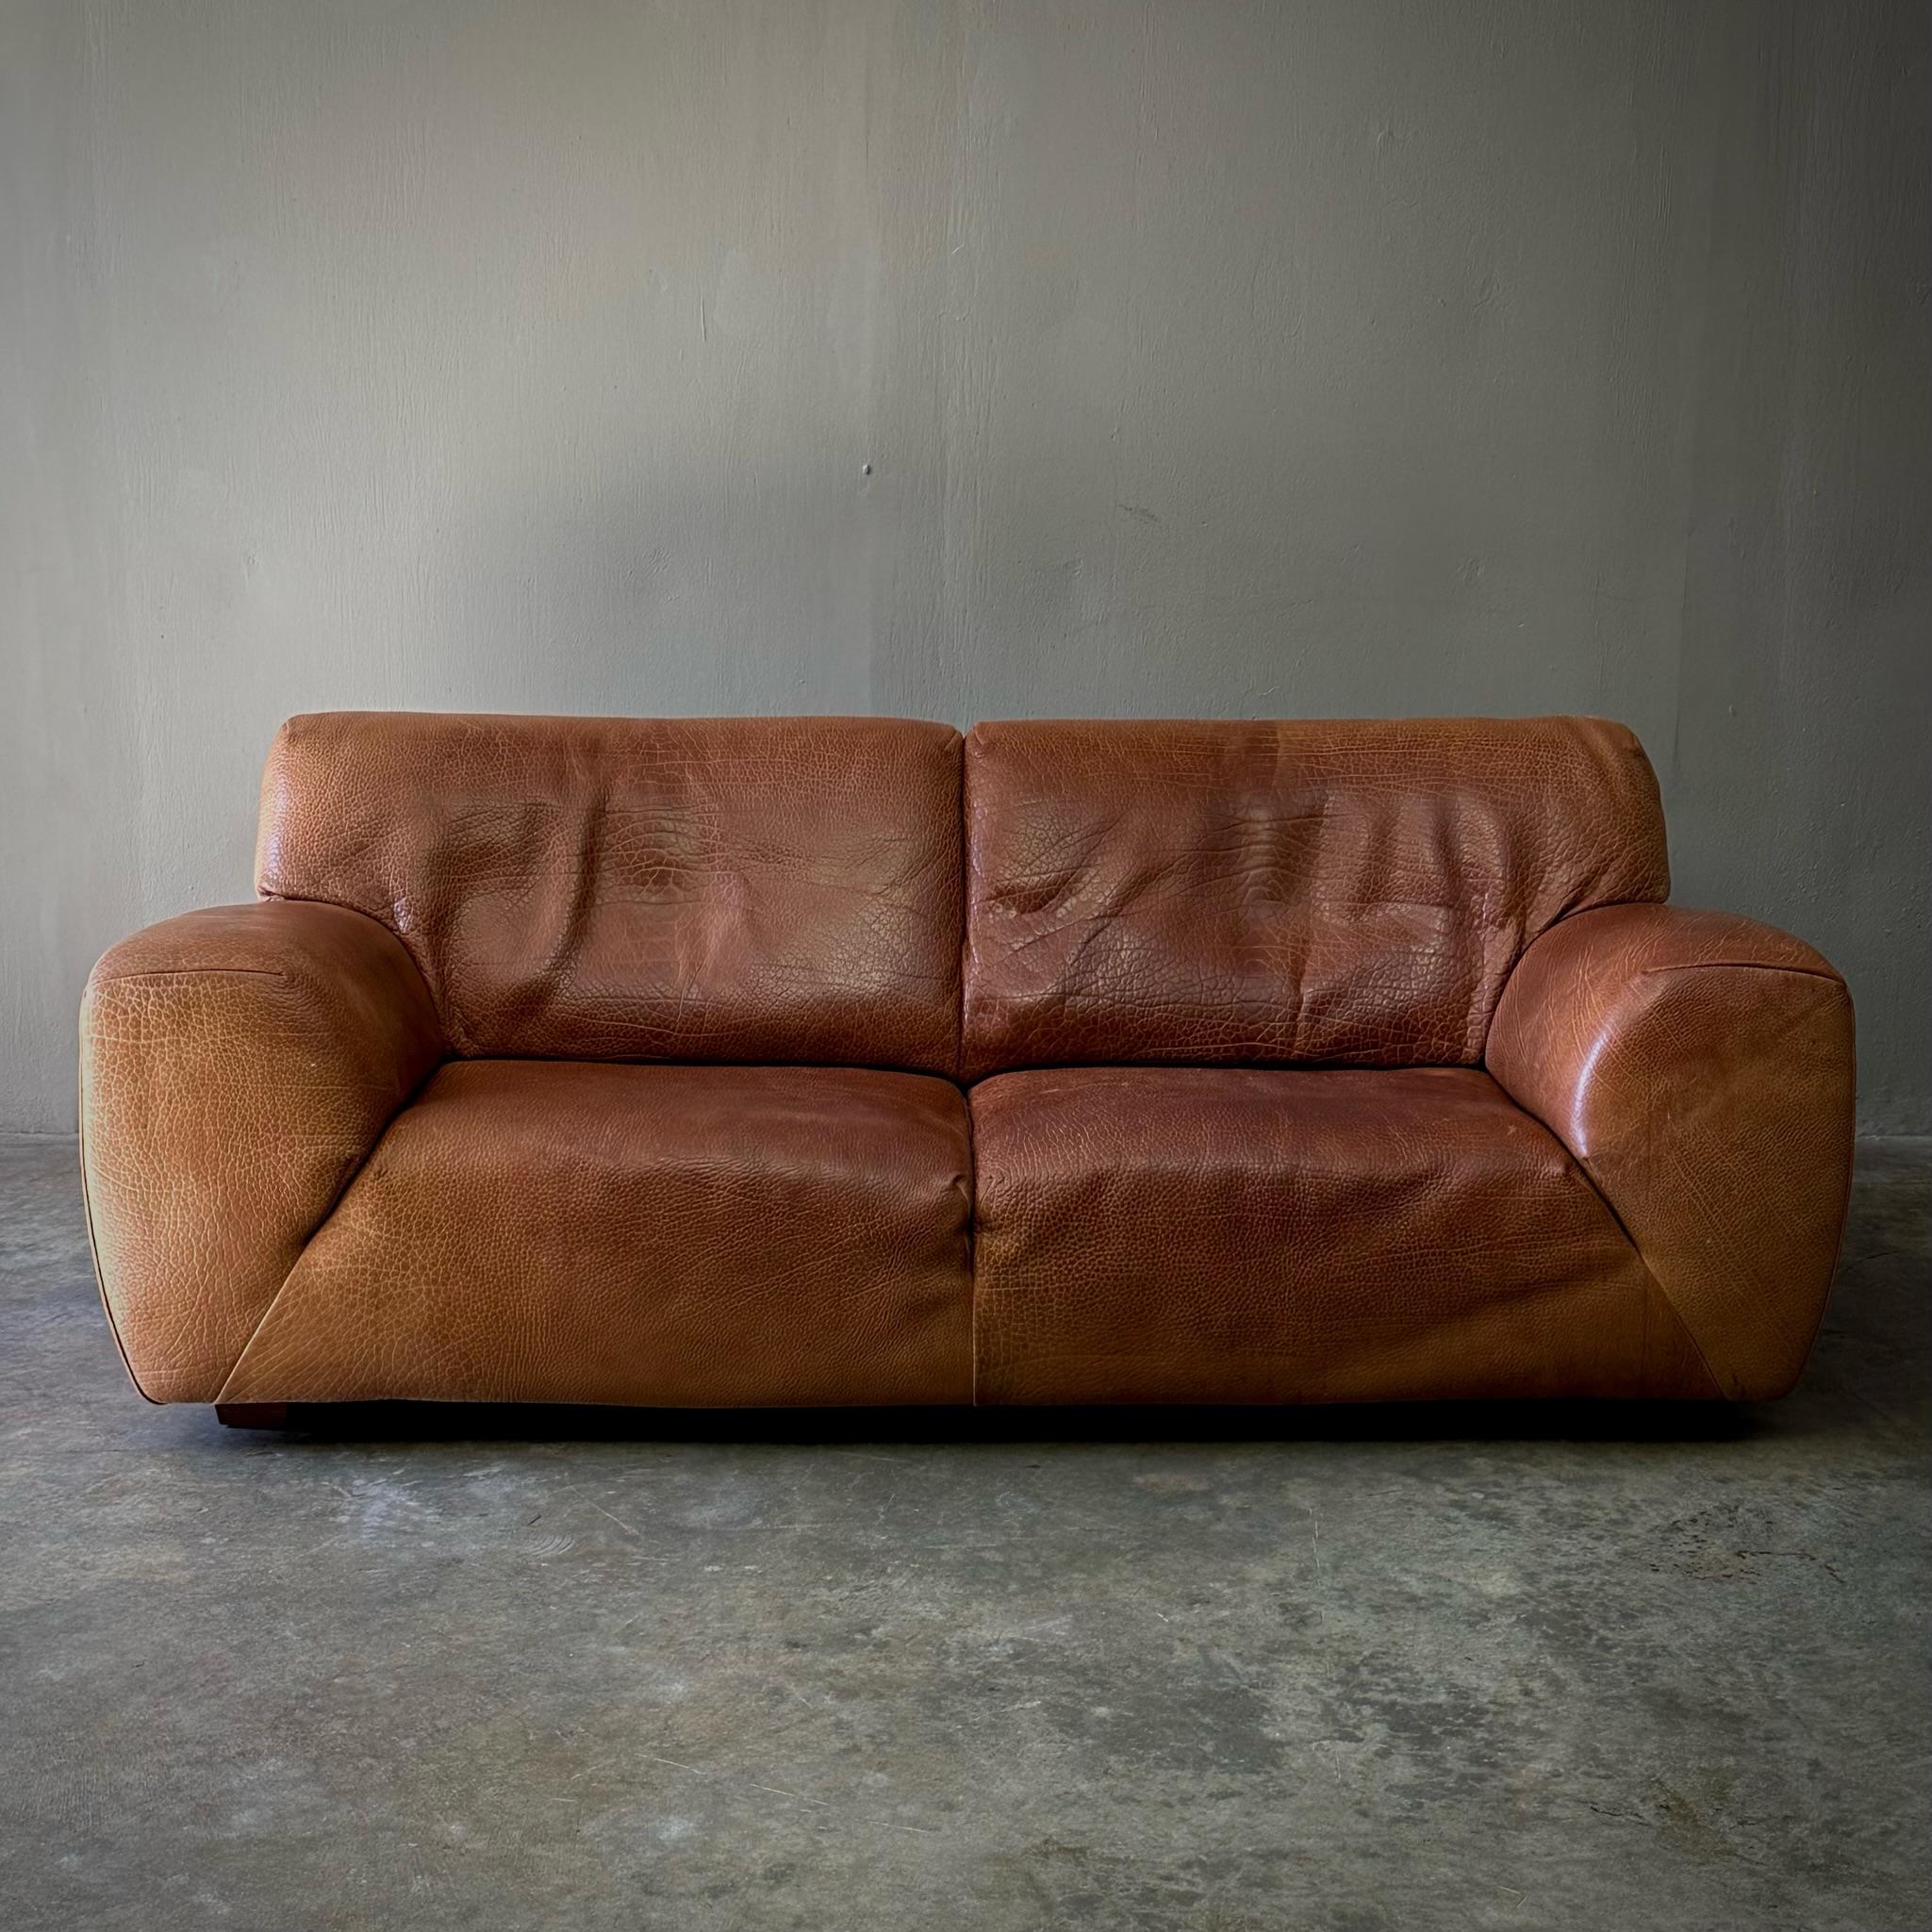 1970s Molinari leather sofa, upholstered in original chestnut leather. Handsome and luxurious with a cool, clean silhouette. In many ways Molinari could be considered the Italian counterpart to Swiss design manufacturer Desede, for its use of